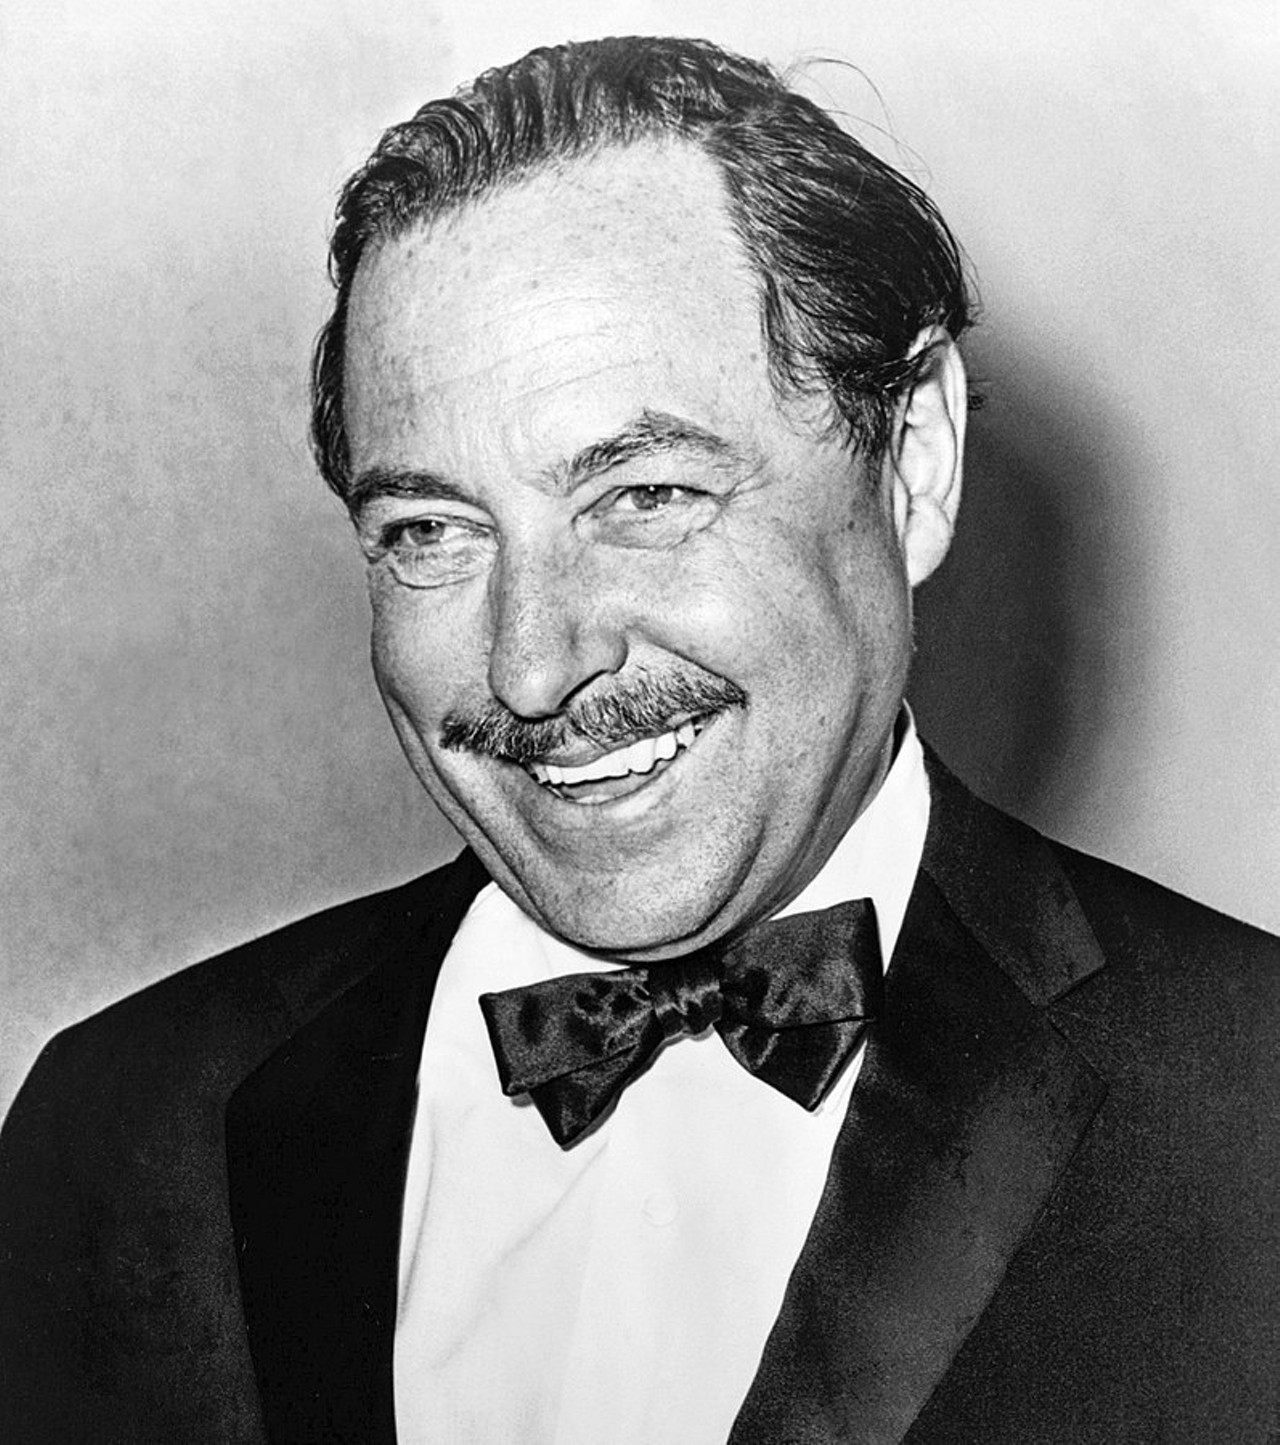 Tennessee Williams
Famous playwright Tennessee Williams spent much of his life in Missouri and is buried near his mother in Calvary Cemetery.
Photo credit: Wikimedia Commons